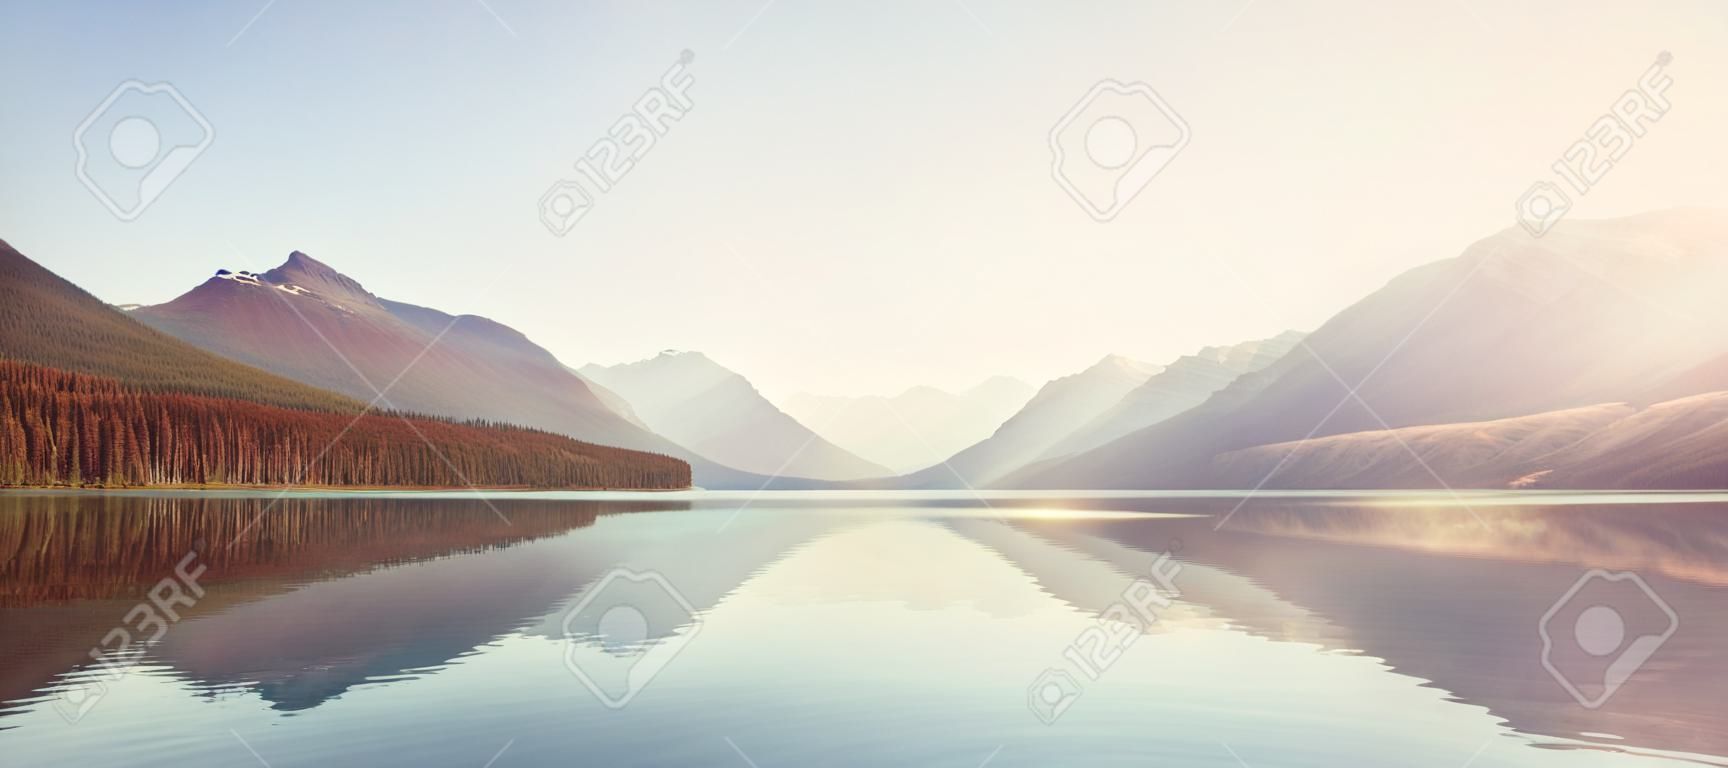 Beautiful Bowman lake with reflection of the spectacular mountains in Glacier National Park, Montana, USA.